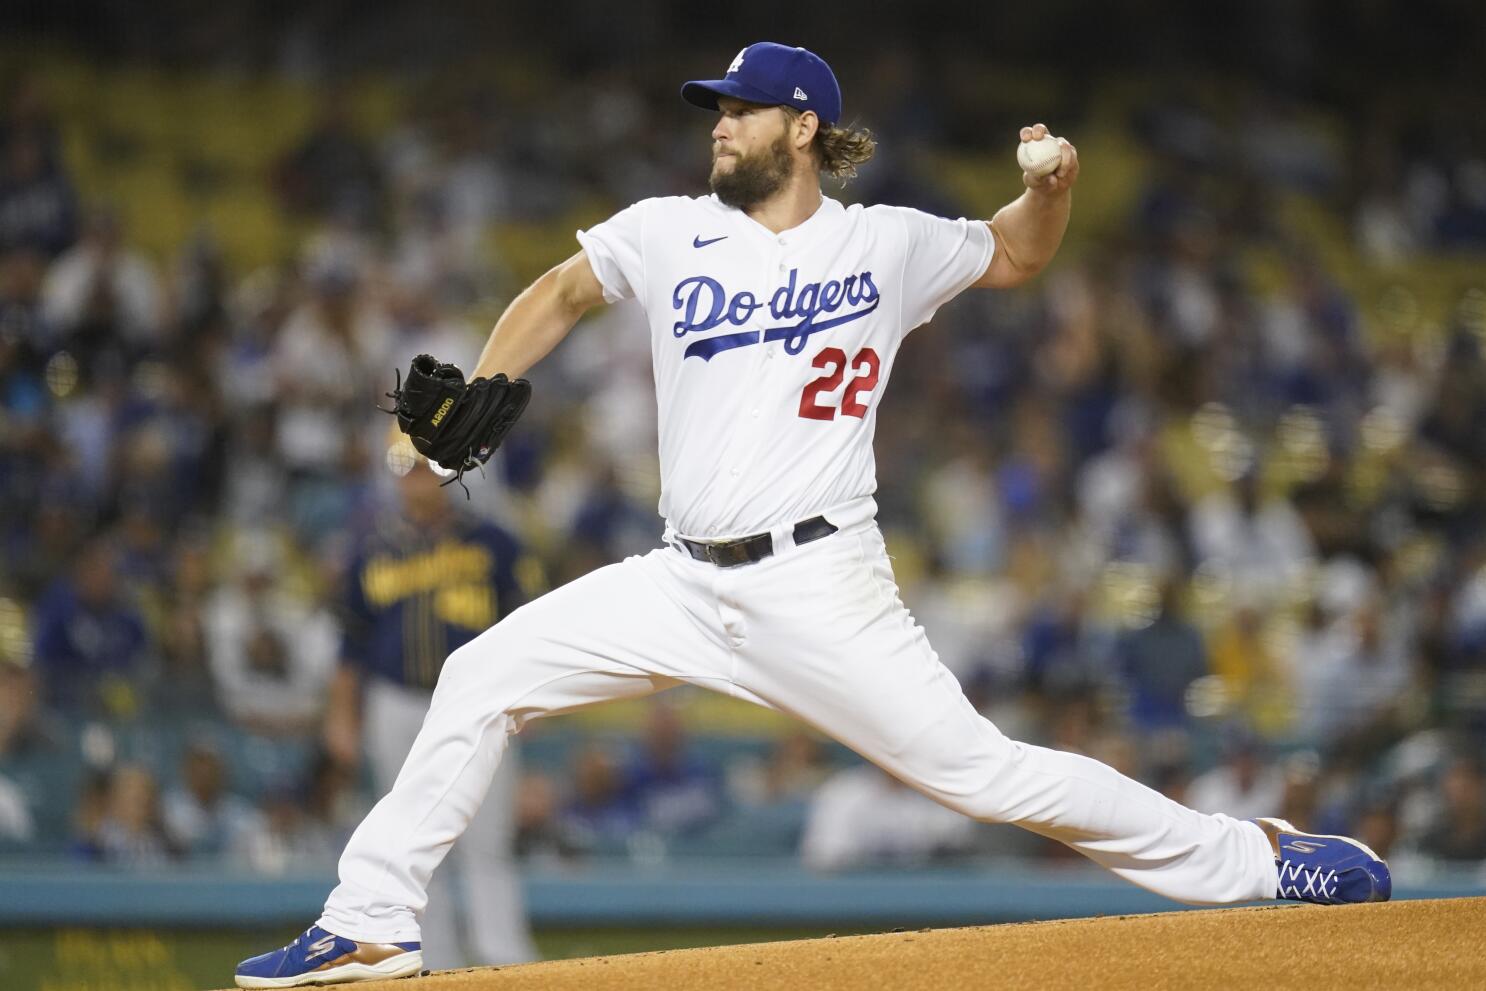 Los Angeles Dodgers closer situation could stay in flux in 2023